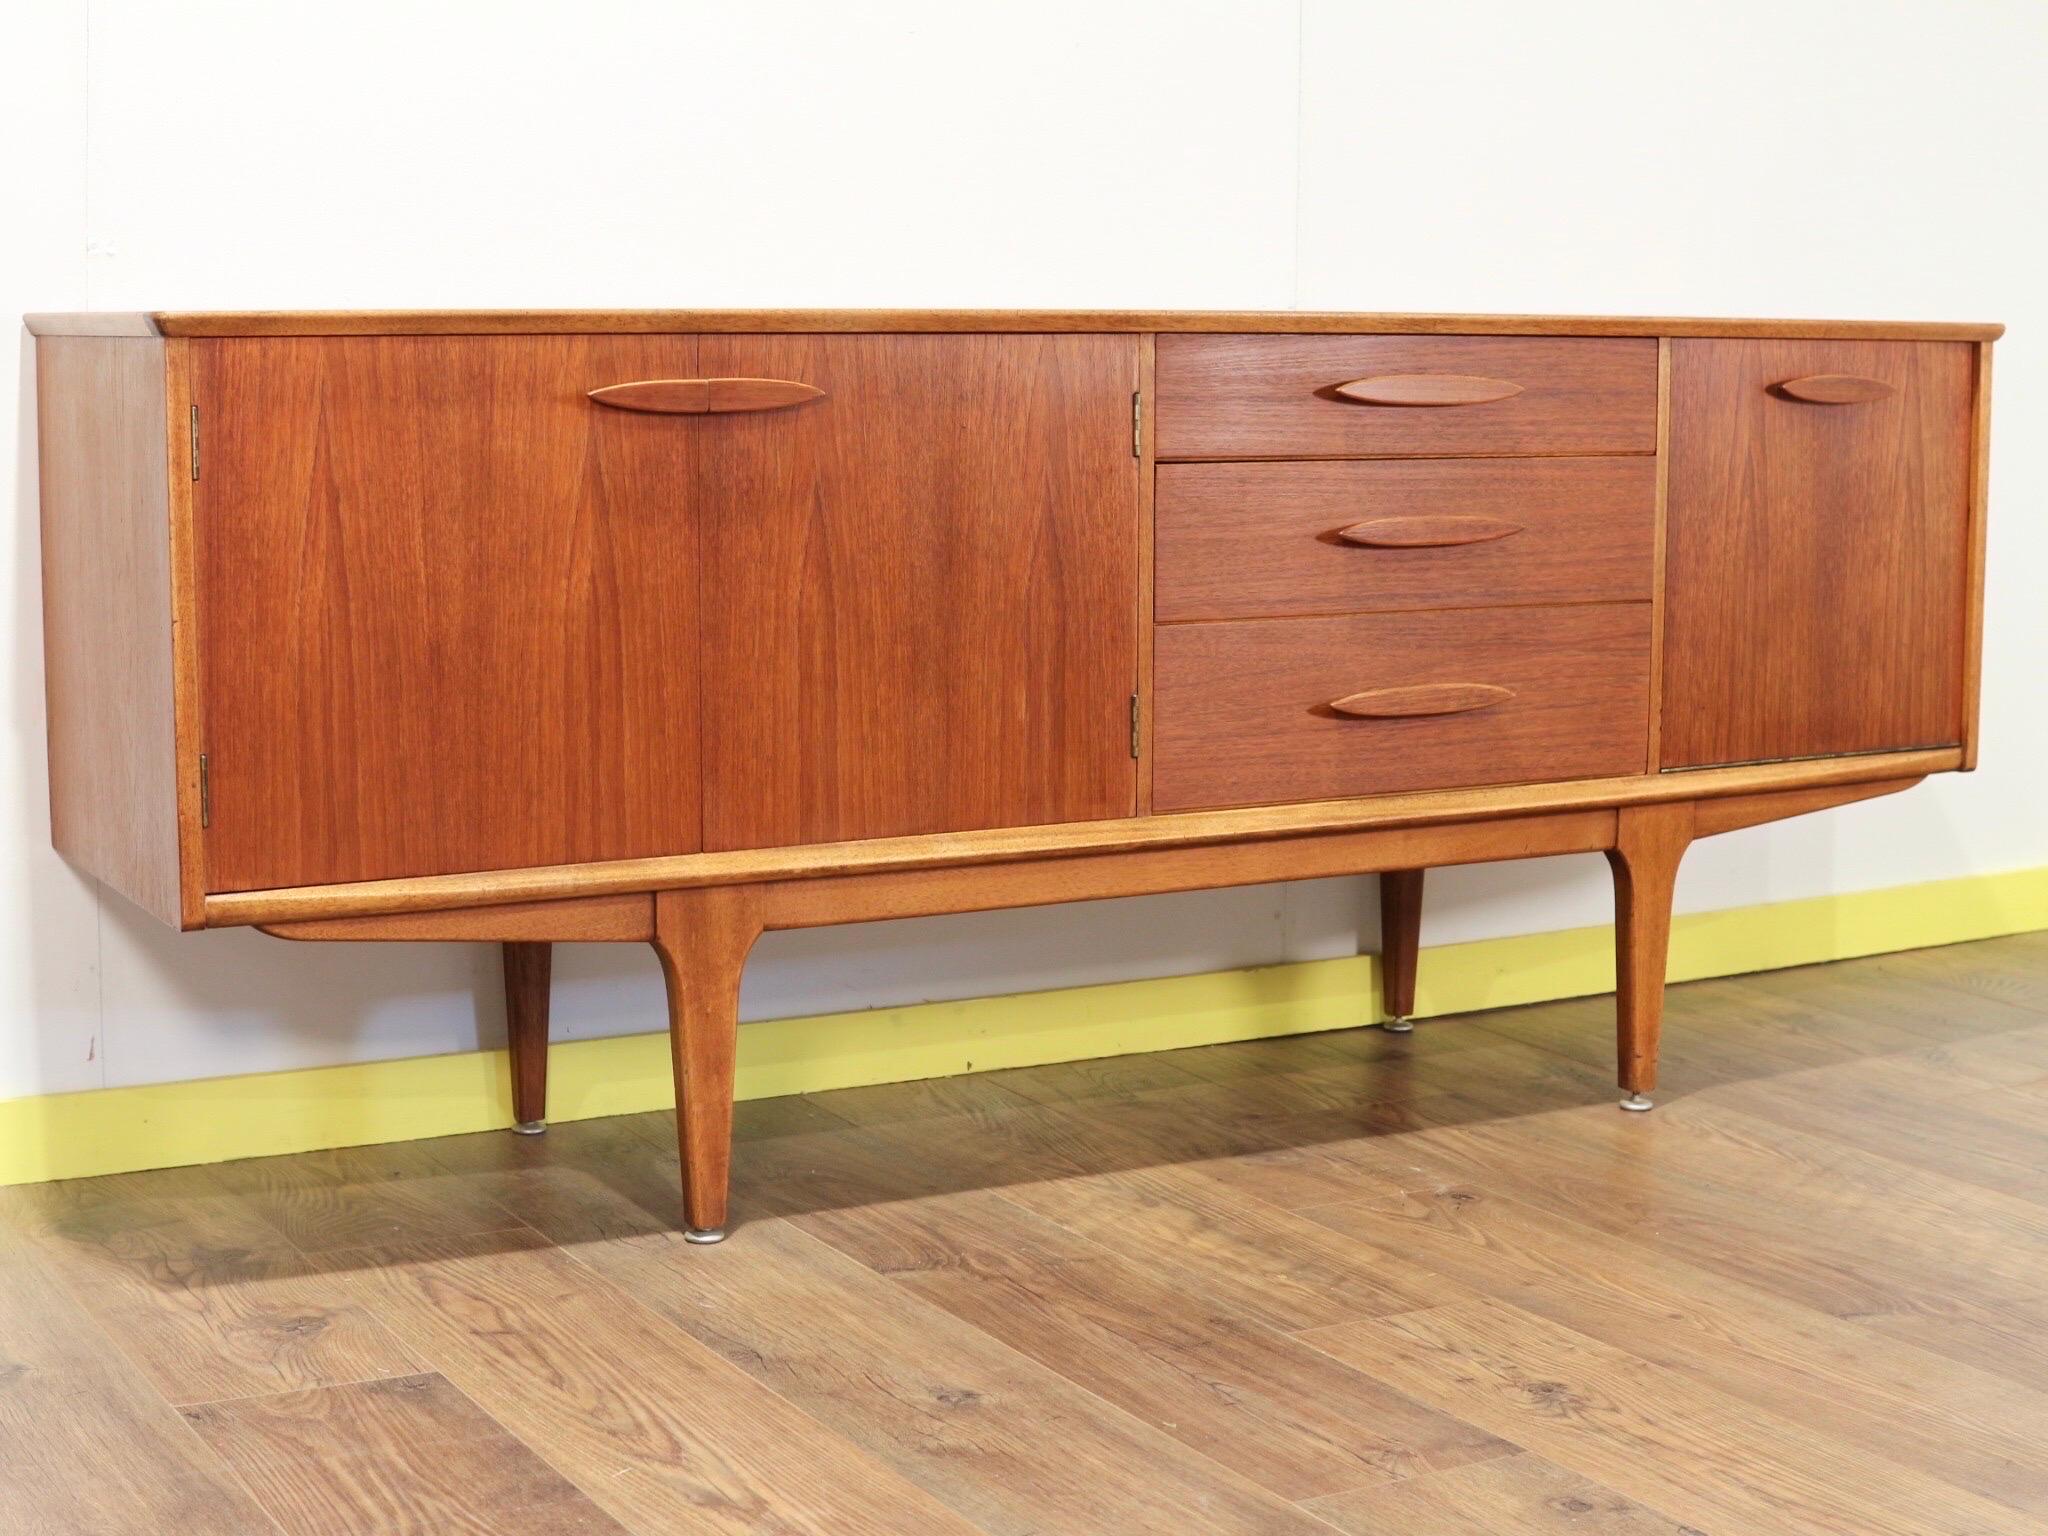 This gorgeous Mid-Century Modern credenza by Jentique is a fantastic piece of furniture. It oozes Danish style and has a fantastic grain in the wood to make it Stand out for the crowd.

With plenty of storage this is a really wonderful piece.